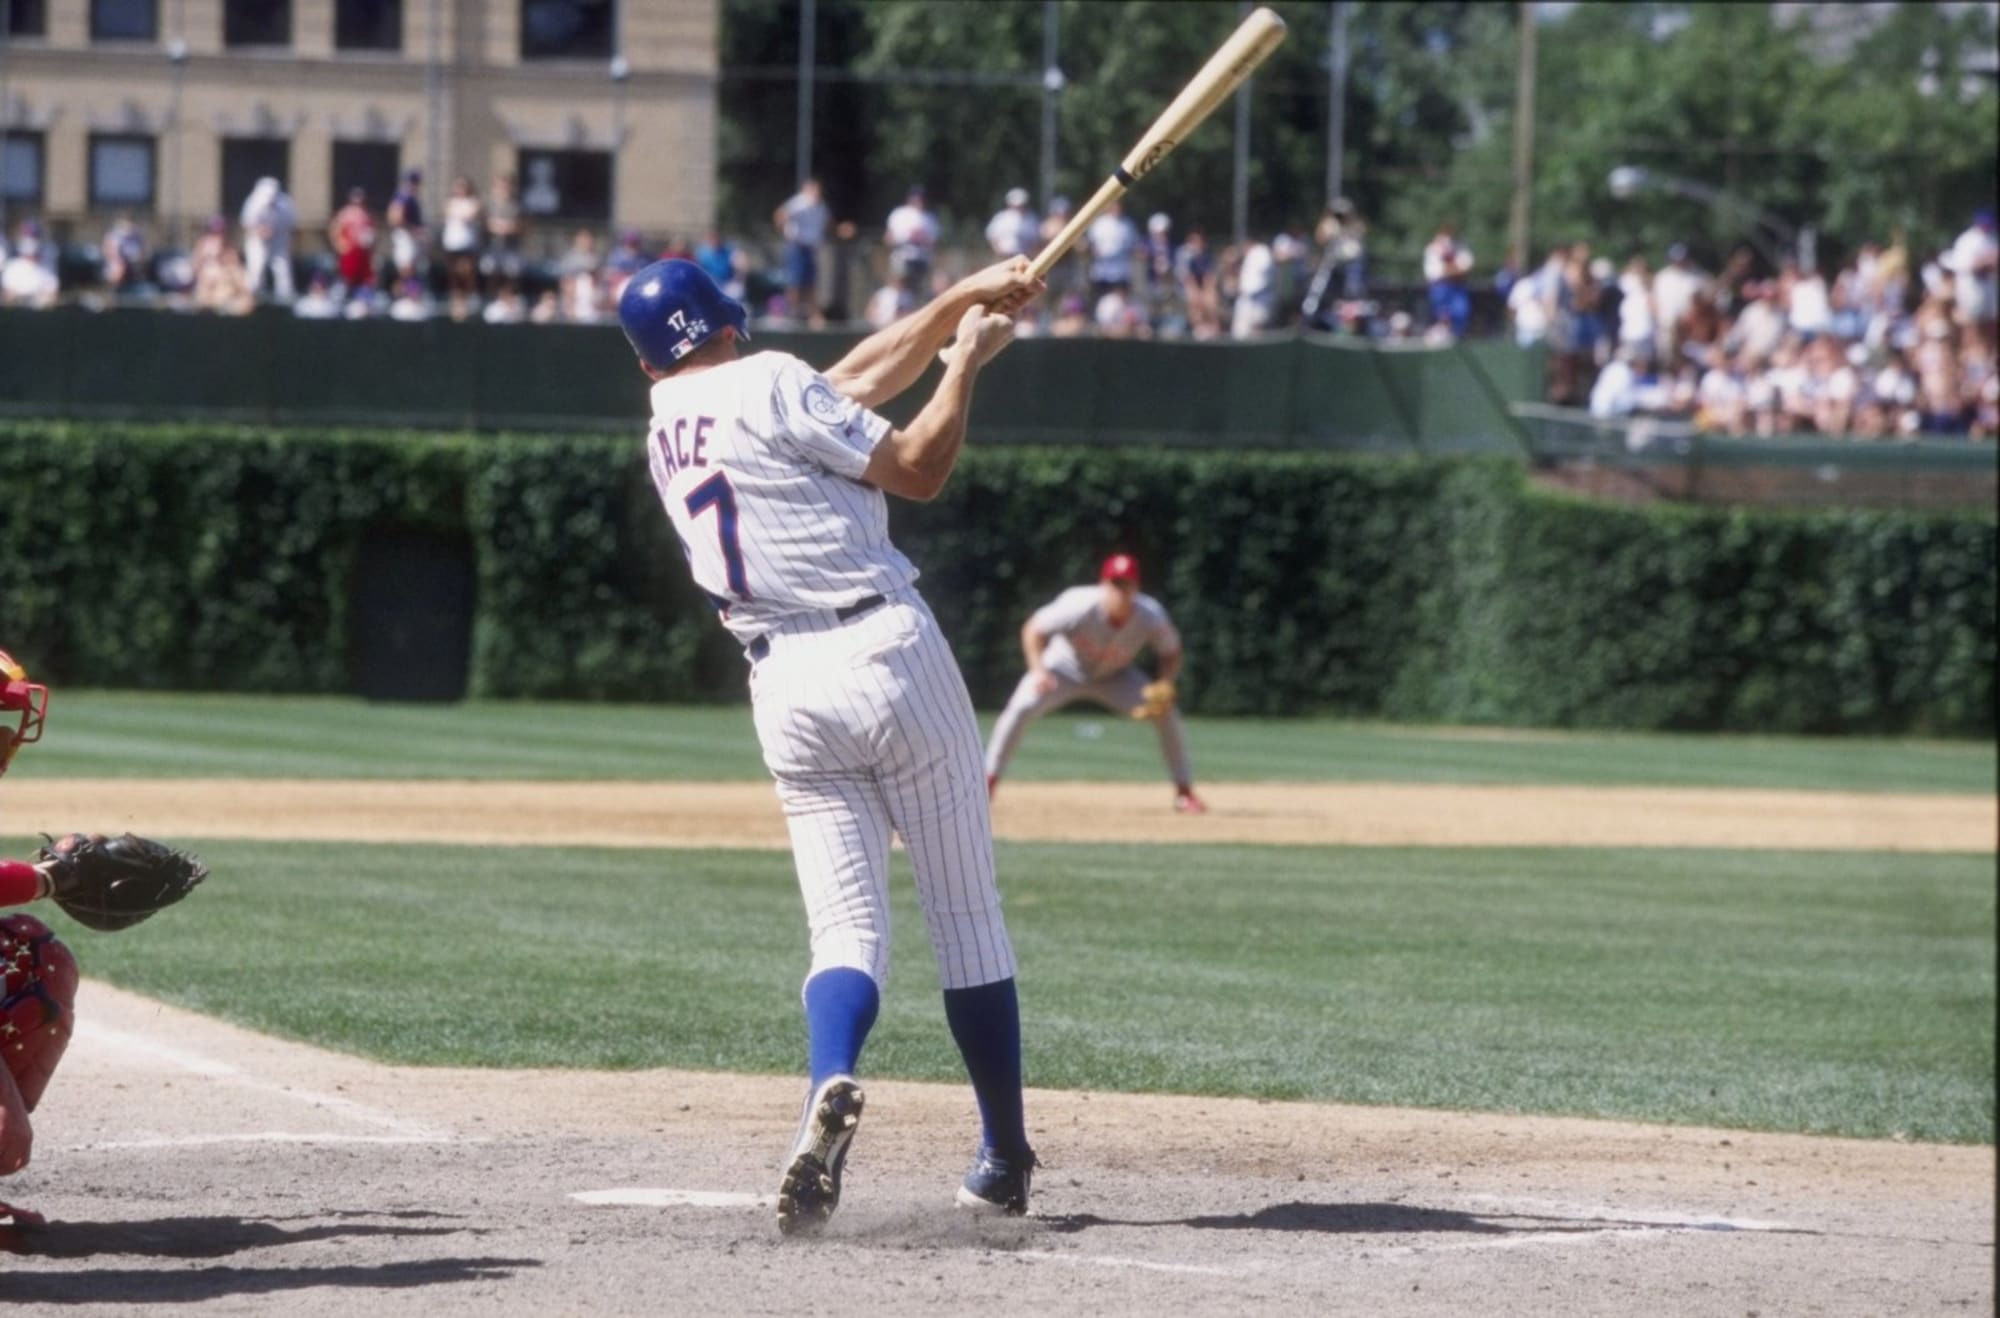 The Chicago Cubs and why I wanted to be 